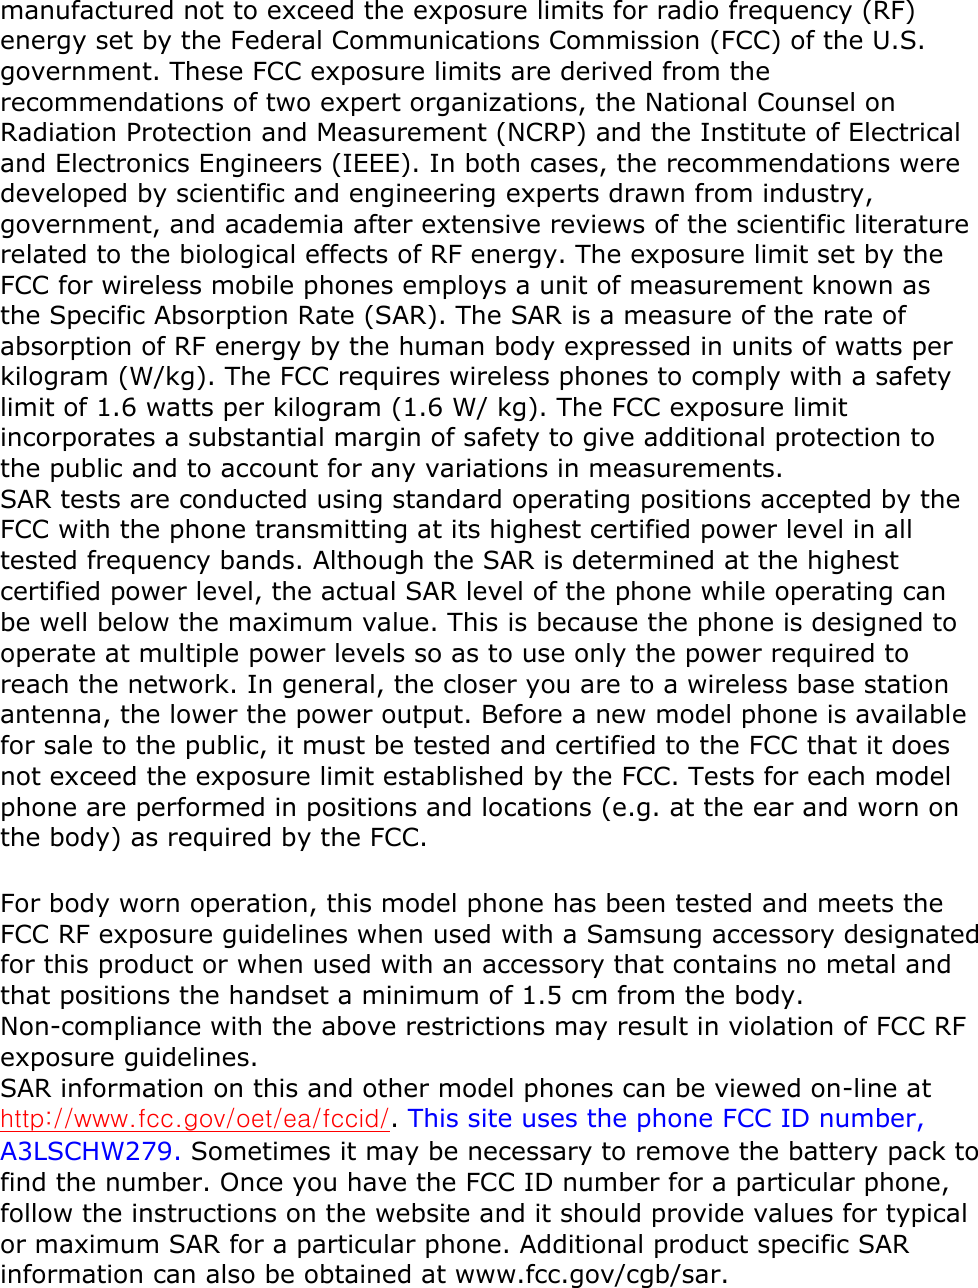 manufactured not to exceed the exposure limits for radio frequency (RF) energy set by the Federal Communications Commission (FCC) of the U.S. government. These FCC exposure limits are derived from the recommendations of two expert organizations, the National Counsel on Radiation Protection and Measurement (NCRP) and the Institute of Electrical and Electronics Engineers (IEEE). In both cases, the recommendations were developed by scientific and engineering experts drawn from industry, government, and academia after extensive reviews of the scientific literature related to the biological effects of RF energy. The exposure limit set by the FCC for wireless mobile phones employs a unit of measurement known as the Specific Absorption Rate (SAR). The SAR is a measure of the rate of absorption of RF energy by the human body expressed in units of watts per kilogram (W/kg). The FCC requires wireless phones to comply with a safety limit of 1.6 watts per kilogram (1.6 W/ kg). The FCC exposure limit incorporates a substantial margin of safety to give additional protection to the public and to account for any variations in measurements.   SAR tests are conducted using standard operating positions accepted by the FCC with the phone transmitting at its highest certified power level in all tested frequency bands. Although the SAR is determined at the highest certified power level, the actual SAR level of the phone while operating can be well below the maximum value. This is because the phone is designed to operate at multiple power levels so as to use only the power required to reach the network. In general, the closer you are to a wireless base station antenna, the lower the power output. Before a new model phone is available for sale to the public, it must be tested and certified to the FCC that it does not exceed the exposure limit established by the FCC. Tests for each model phone are performed in positions and locations (e.g. at the ear and worn on the body) as required by the FCC.   For body worn operation, this model phone has been tested and meets the FCC RF exposure guidelines when used with a Samsung accessory designated for this product or when used with an accessory that contains no metal and that positions the handset a minimum of 1.5 cm from the body. Non-compliance with the above restrictions may result in violation of FCC RF exposure guidelines.   SAR information on this and other model phones can be viewed on-line at http://www.fcc.gov/oet/ea/fccid/. This site uses the phone FCC ID number, A3LSCHW279. Sometimes it may be necessary to remove the battery pack to find the number. Once you have the FCC ID number for a particular phone, follow the instructions on the website and it should provide values for typical or maximum SAR for a particular phone. Additional product specific SAR information can also be obtained at www.fcc.gov/cgb/sar.   